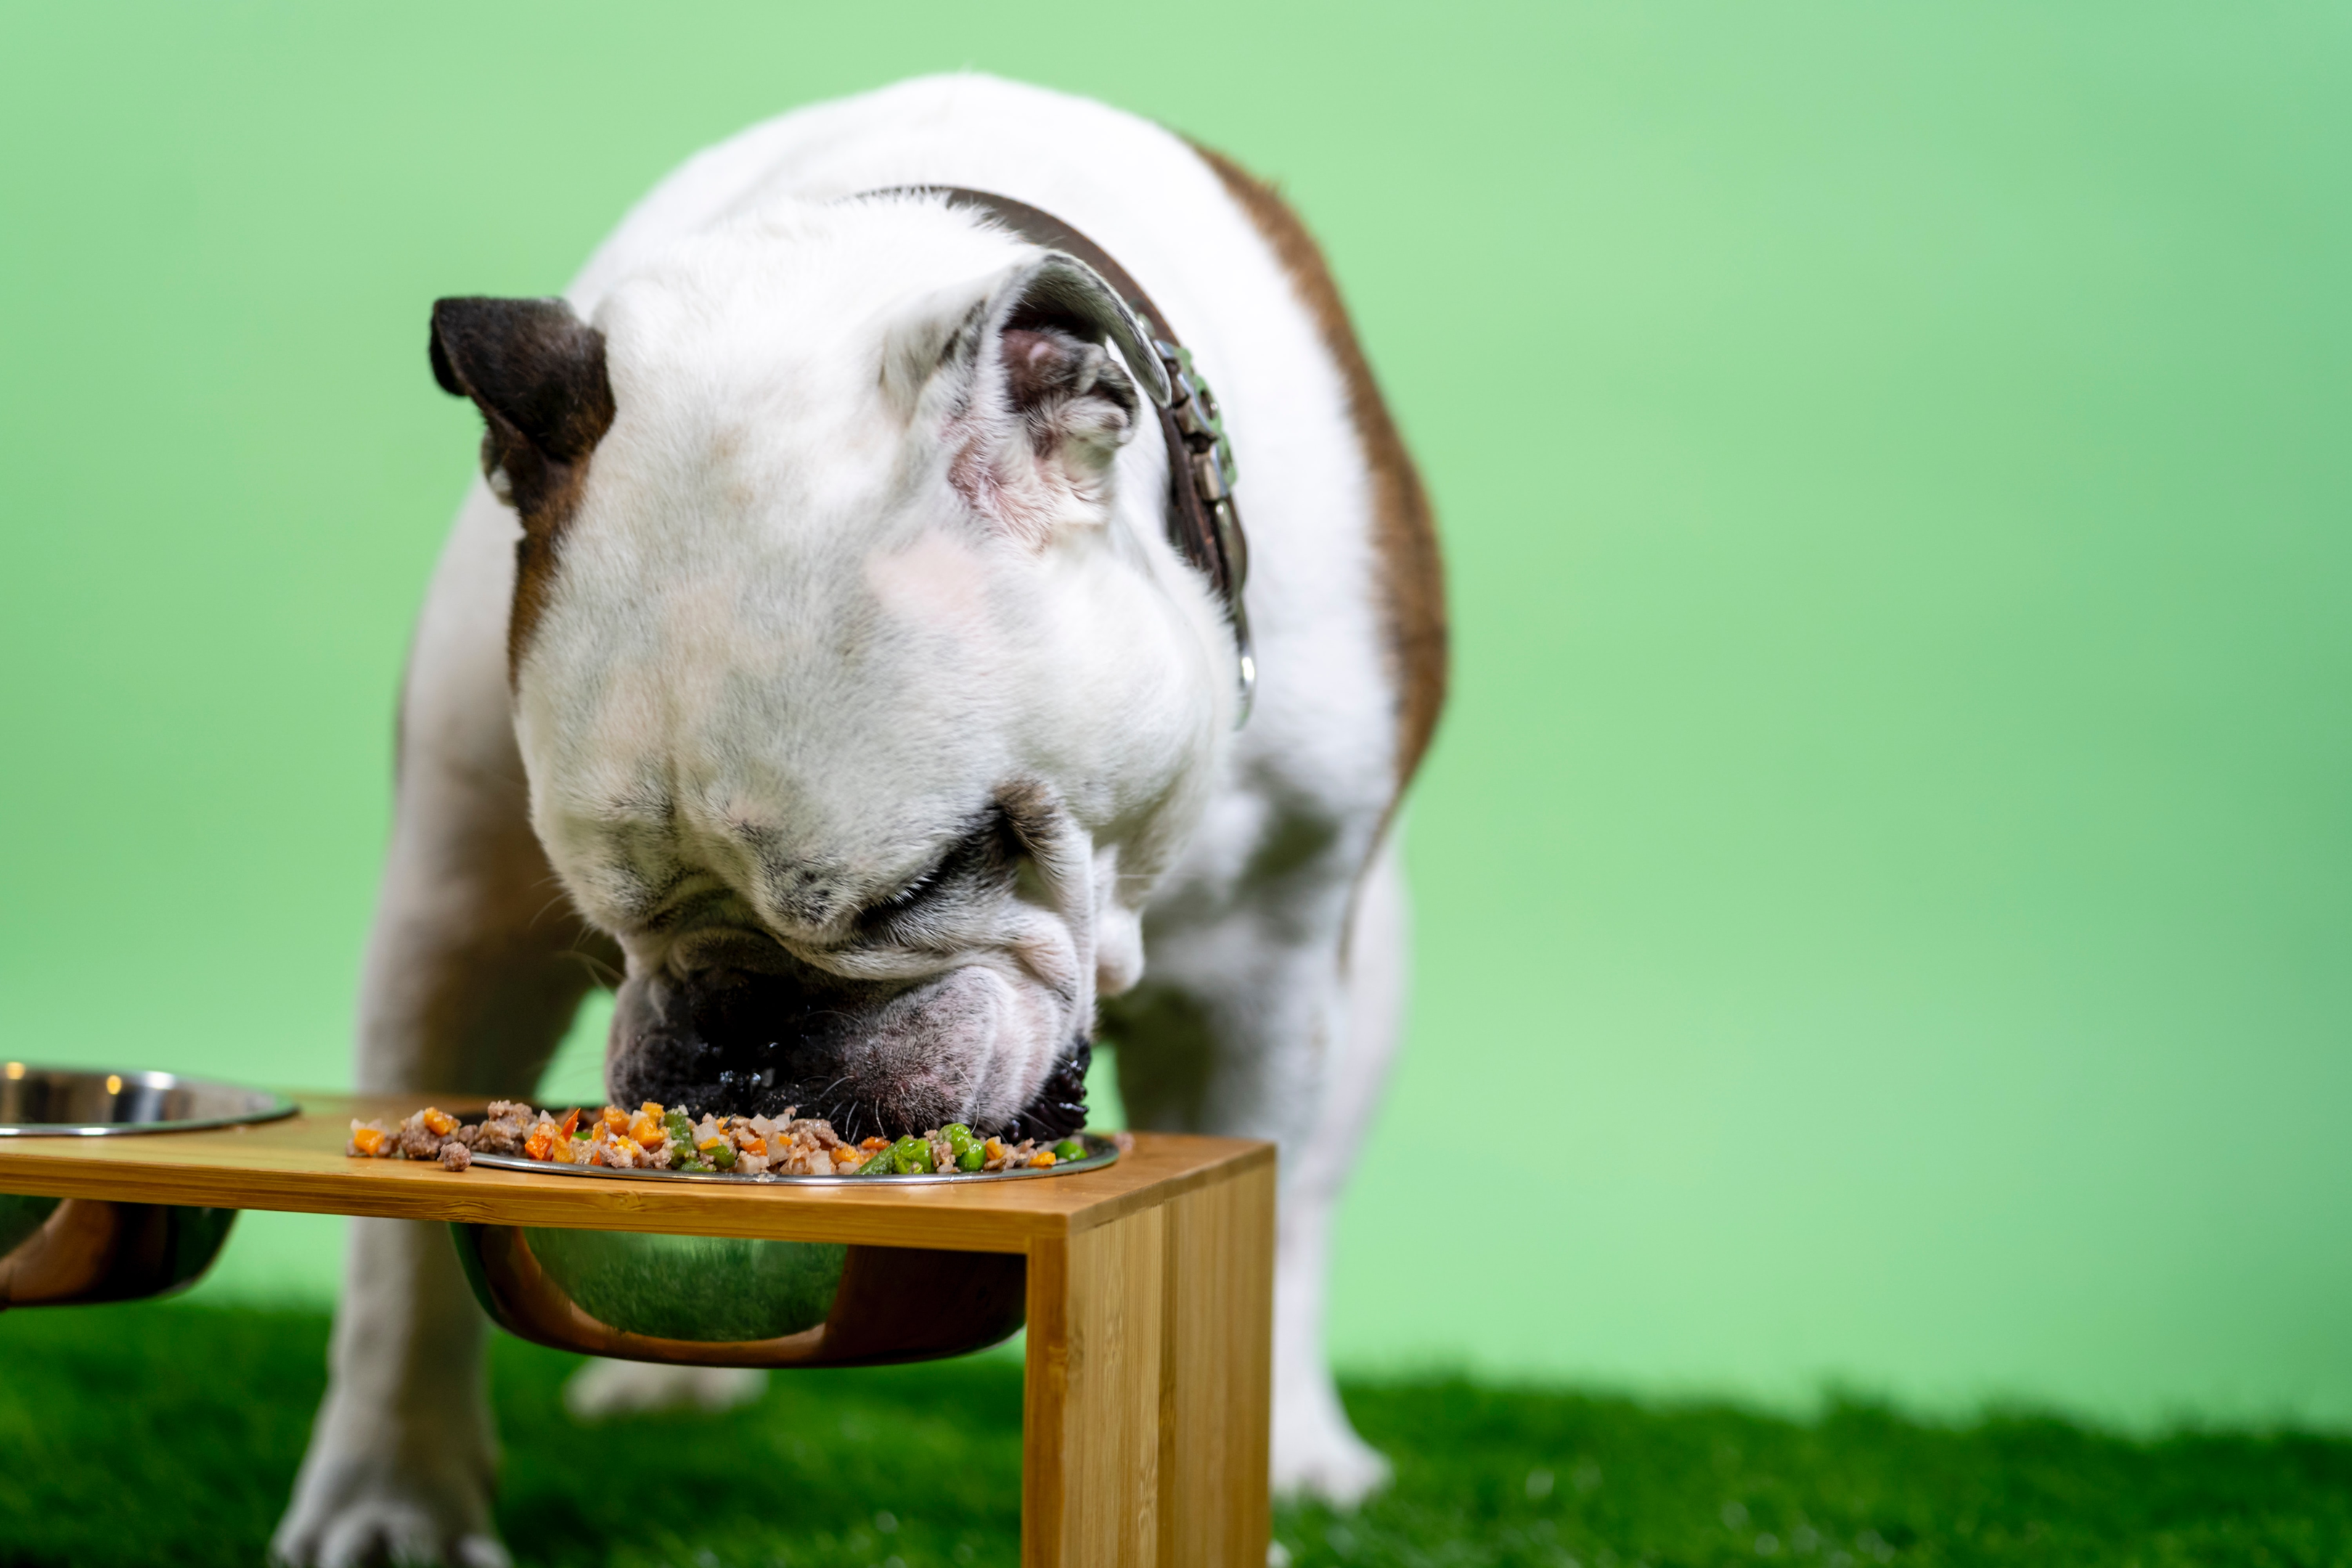 Dog eating food from a food bowl